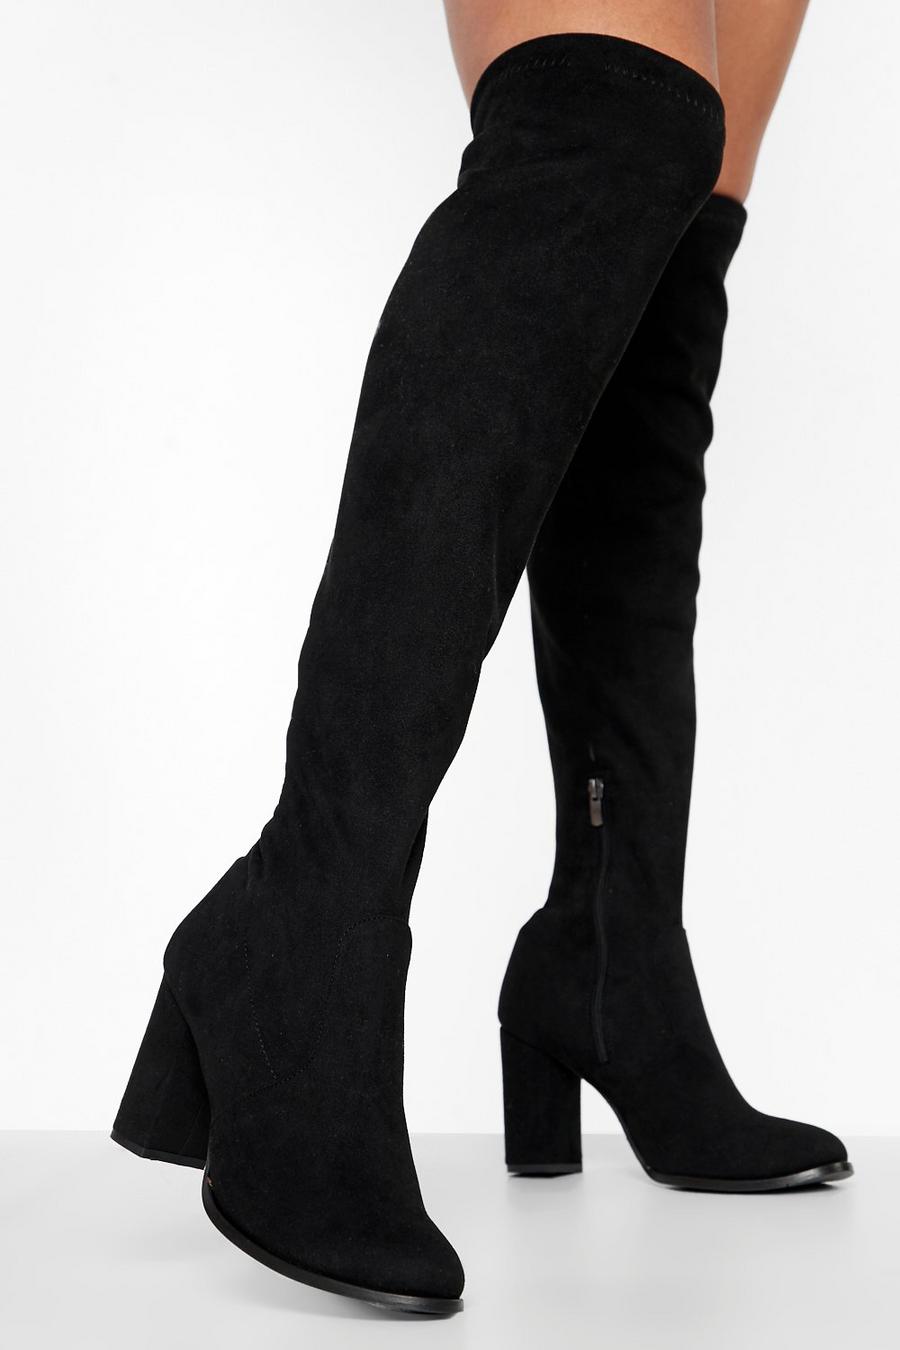 Black Block Heel Over The Knee Thigh High Boots